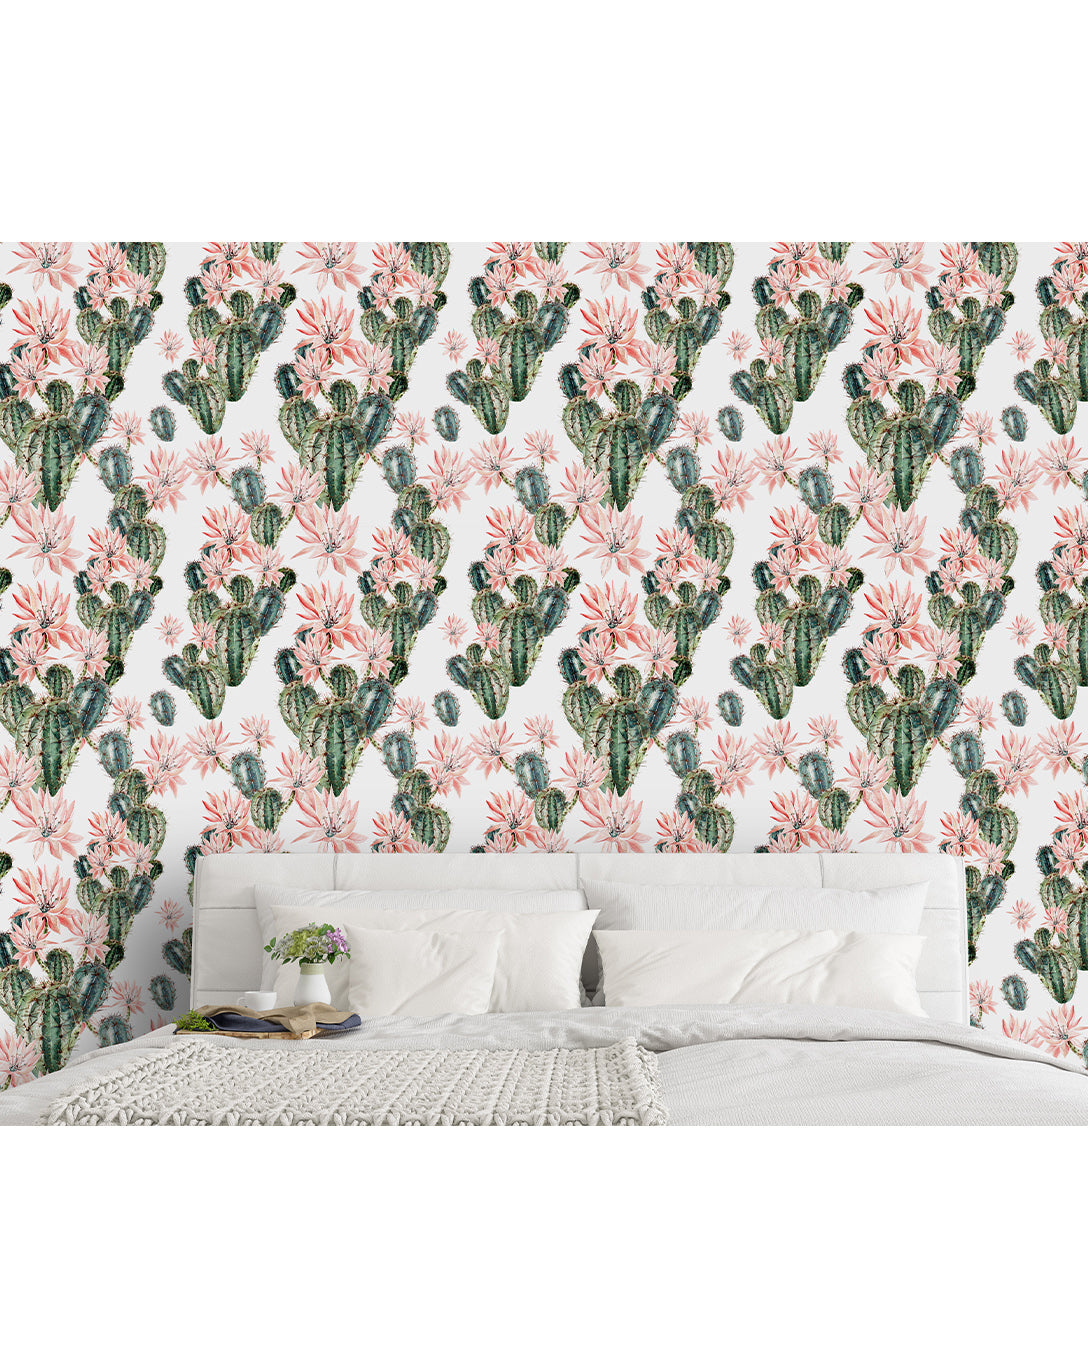 Self Adhesive Watercolor Floral Blooming Cactus Removable Wallpaper CC052